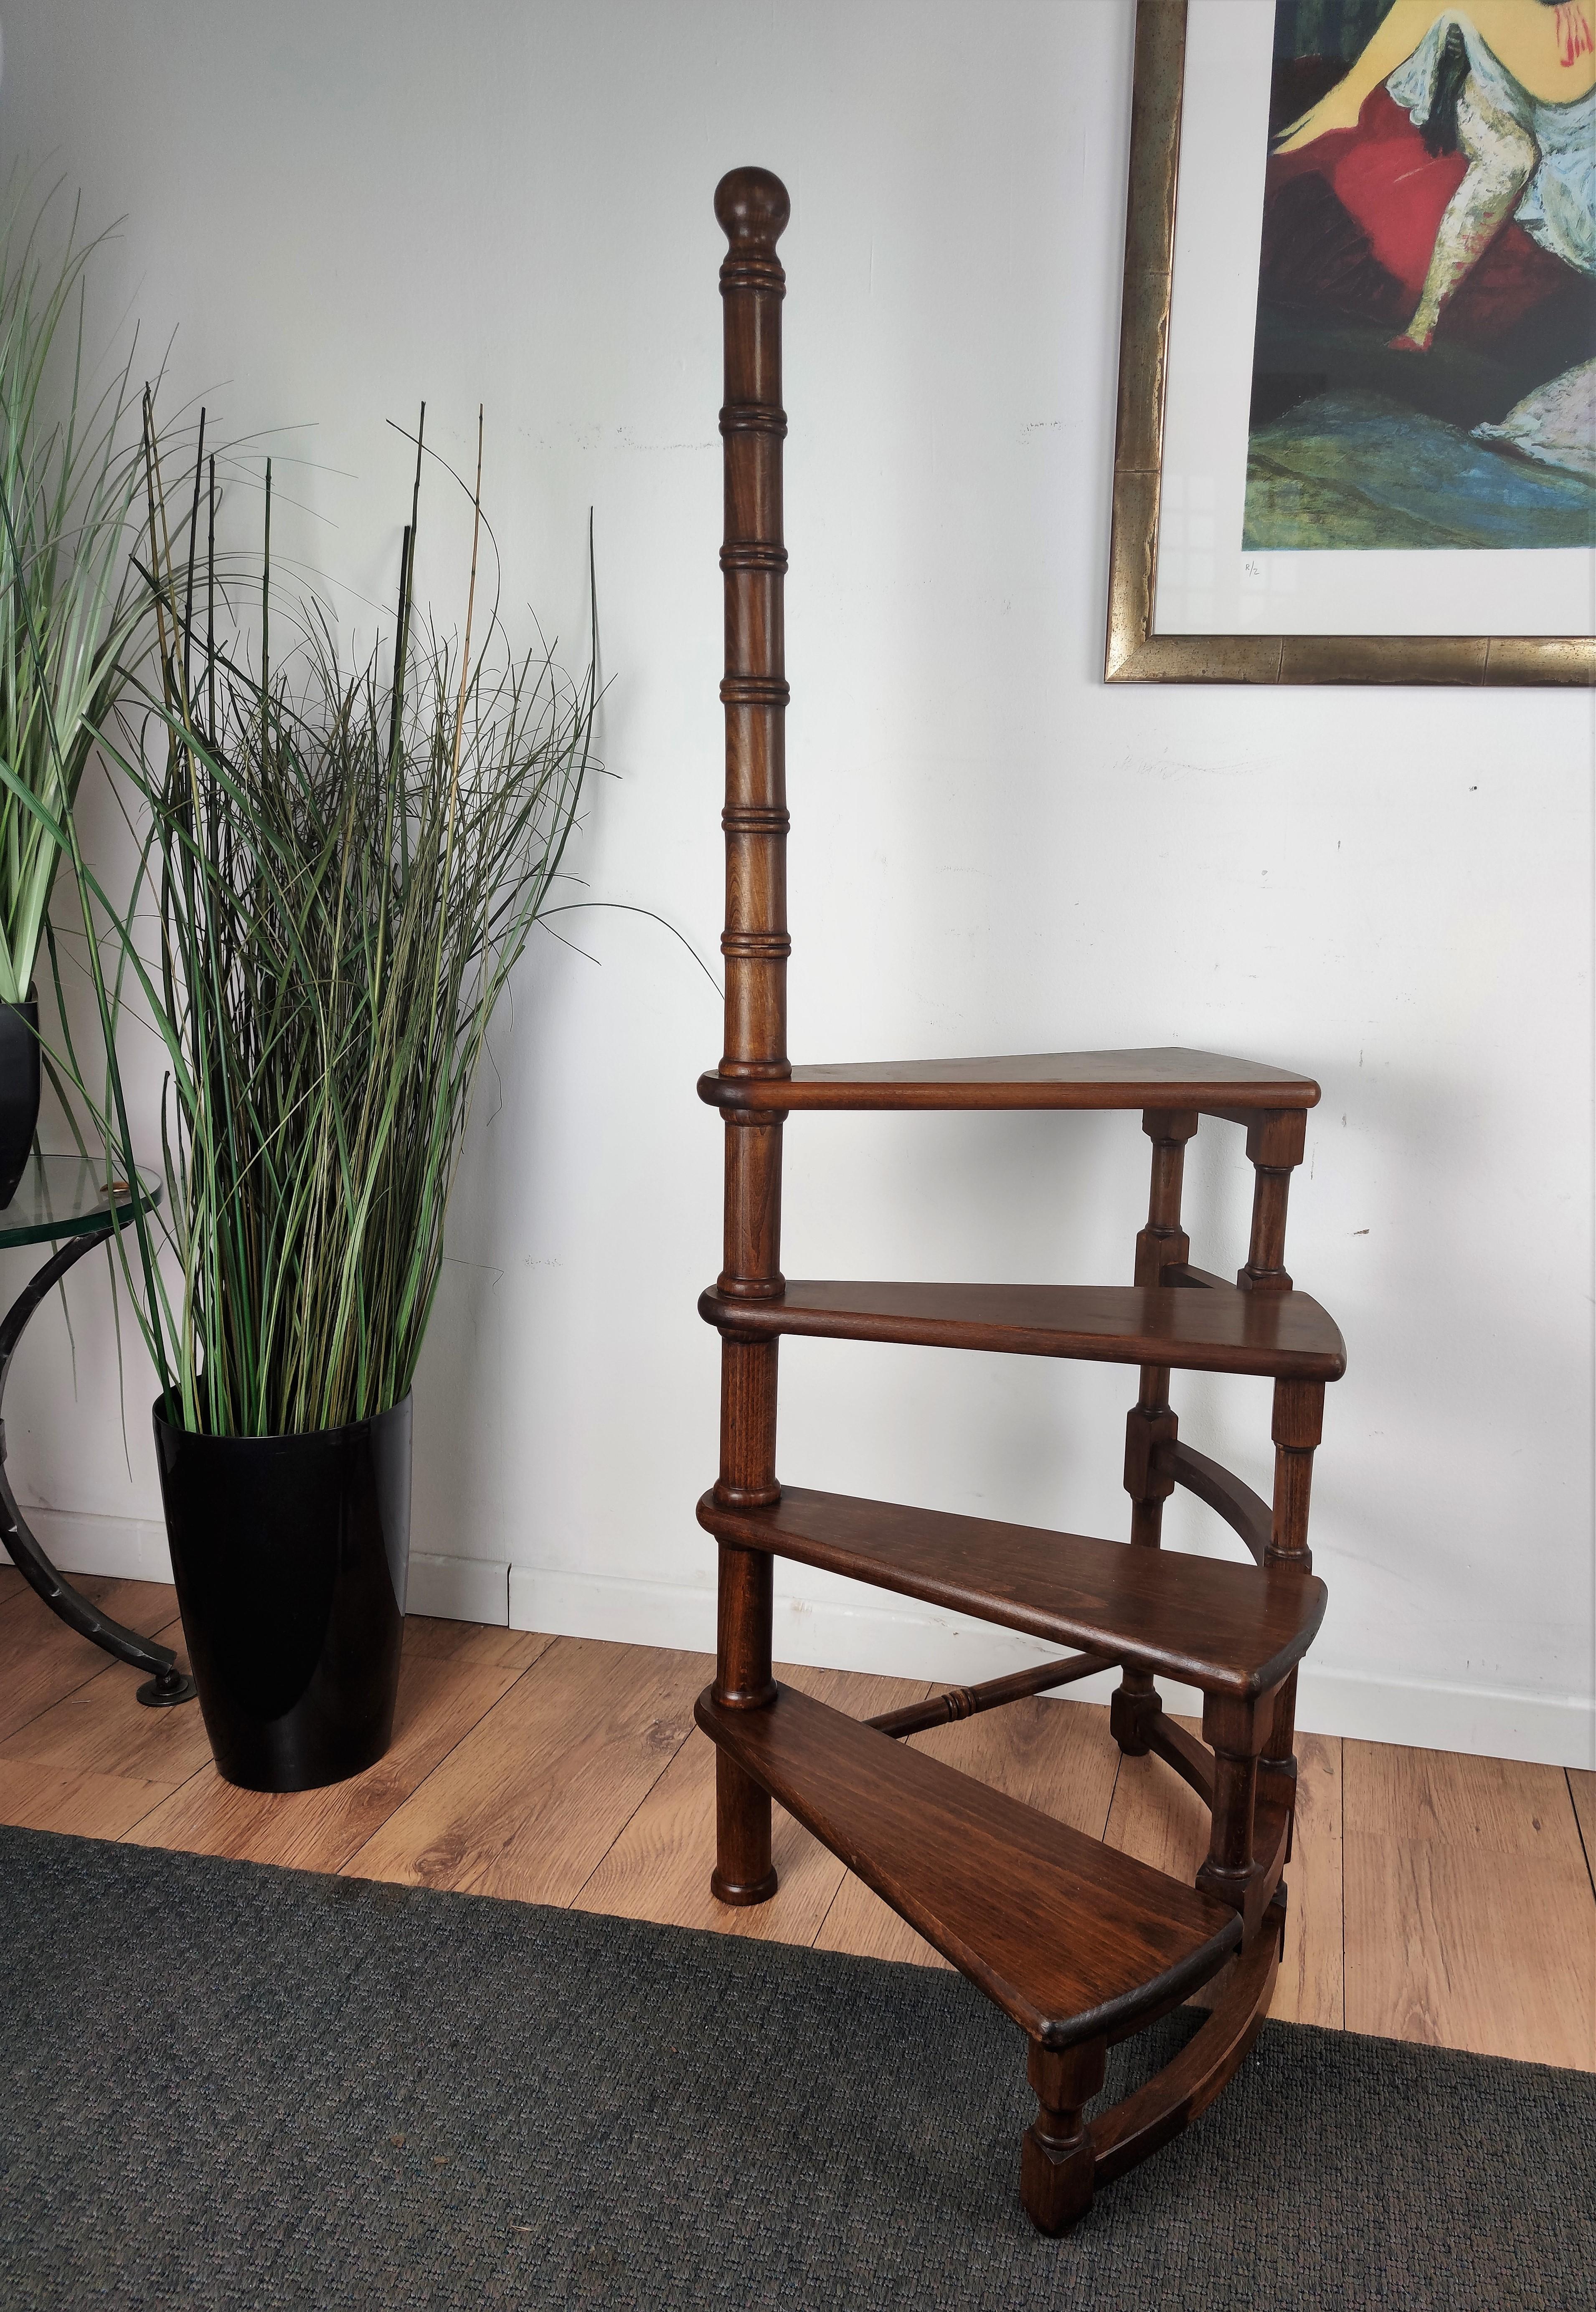 Beautiful Italian carved walnut wood tall circular step ladder with four stairs rolled around a turned, central post embellished with a decorative finial. Versatile and practical, the elegant library essential is in excellent condition with a rich